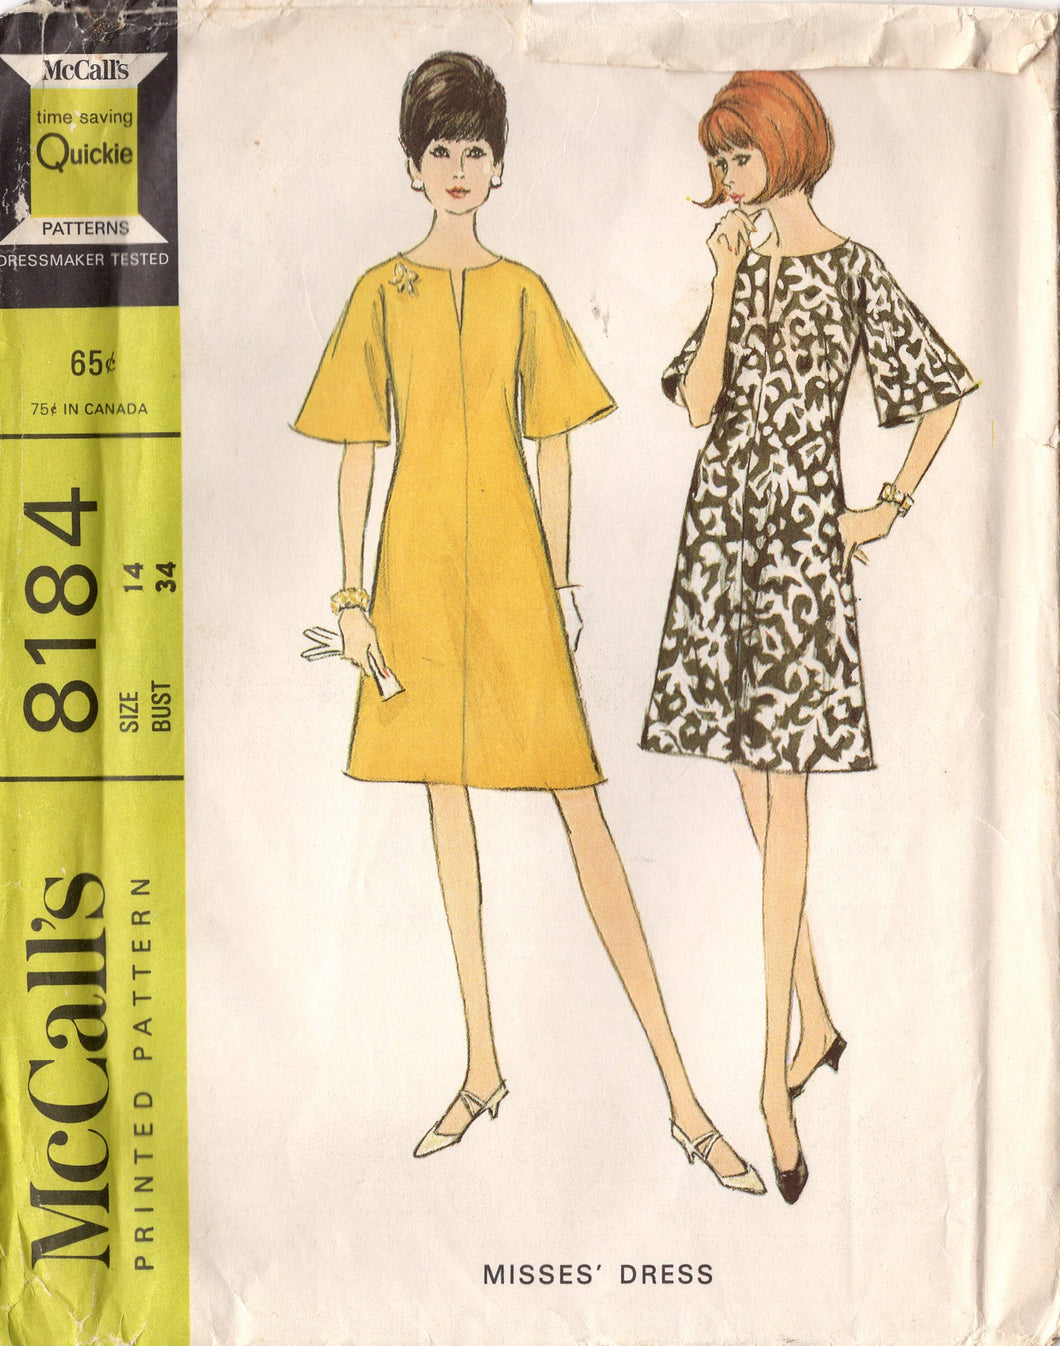 1960's McCall's One Piece Dress Pattern with Bell Sleeves - Bust 34